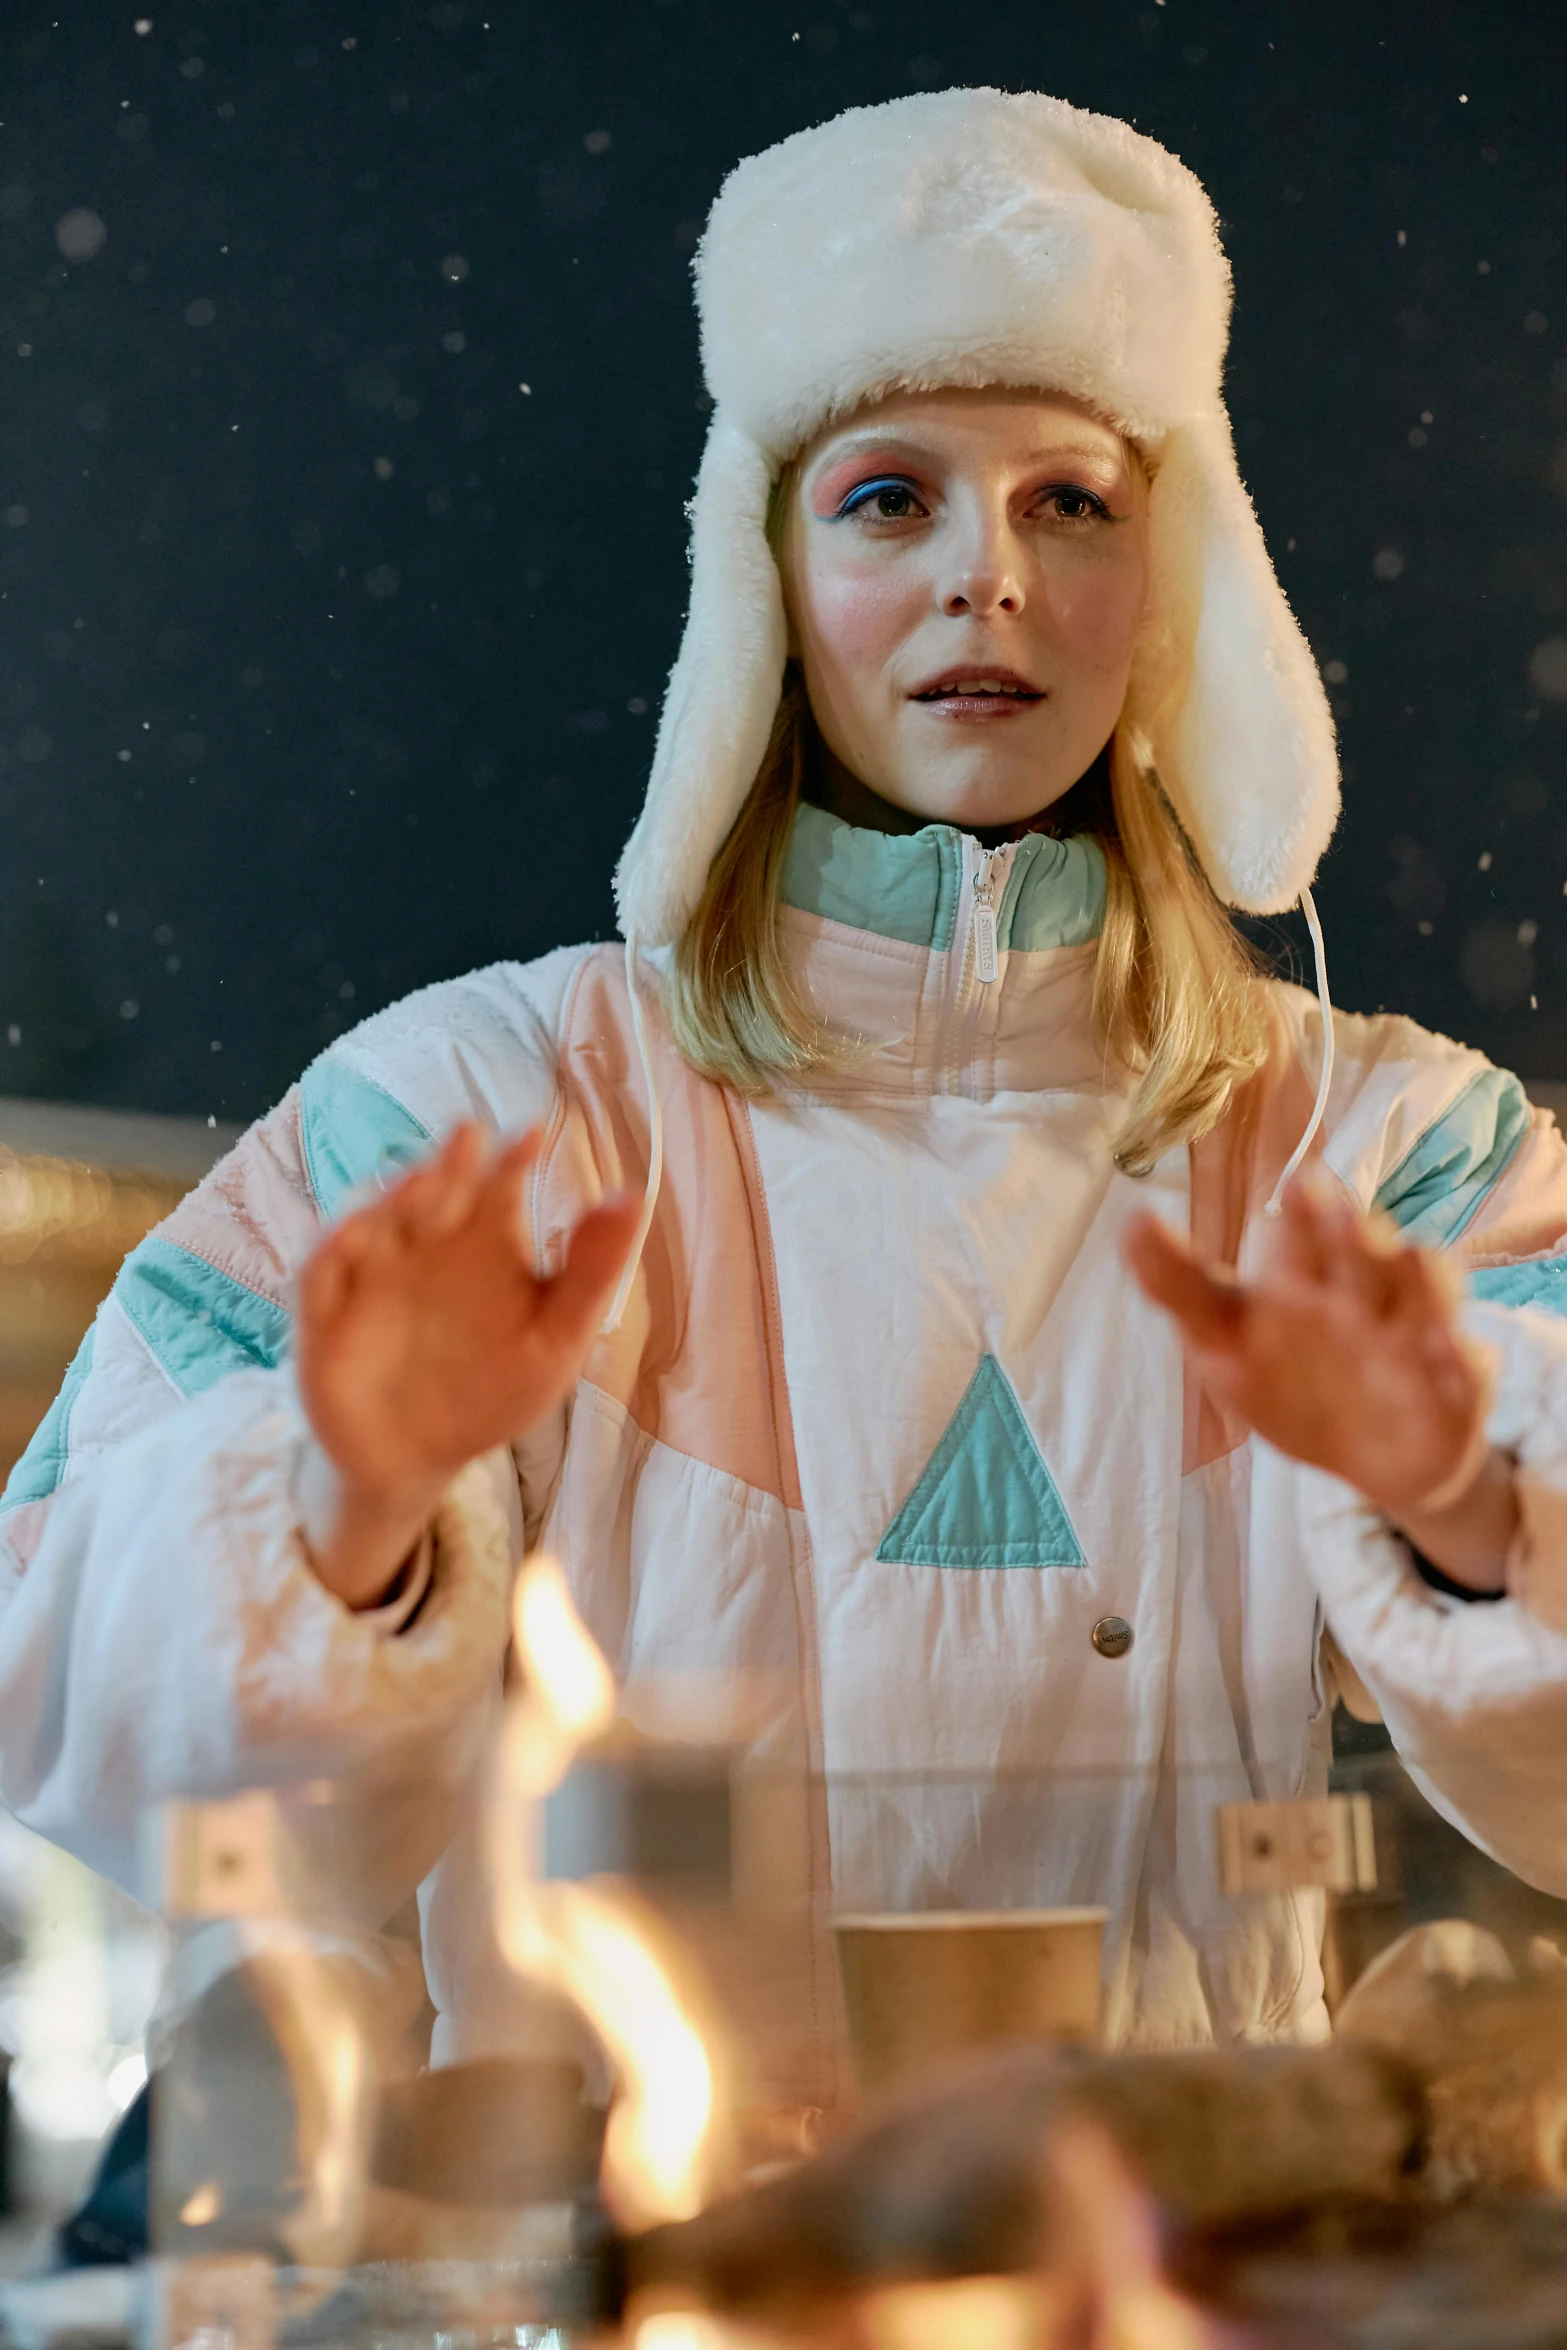 a woman sitting at a table with candles in front of her, inspired by Louisa Matthíasdóttir, wearing astronaut outfit, marshmallow, peak experience ”, wearing festive clothing